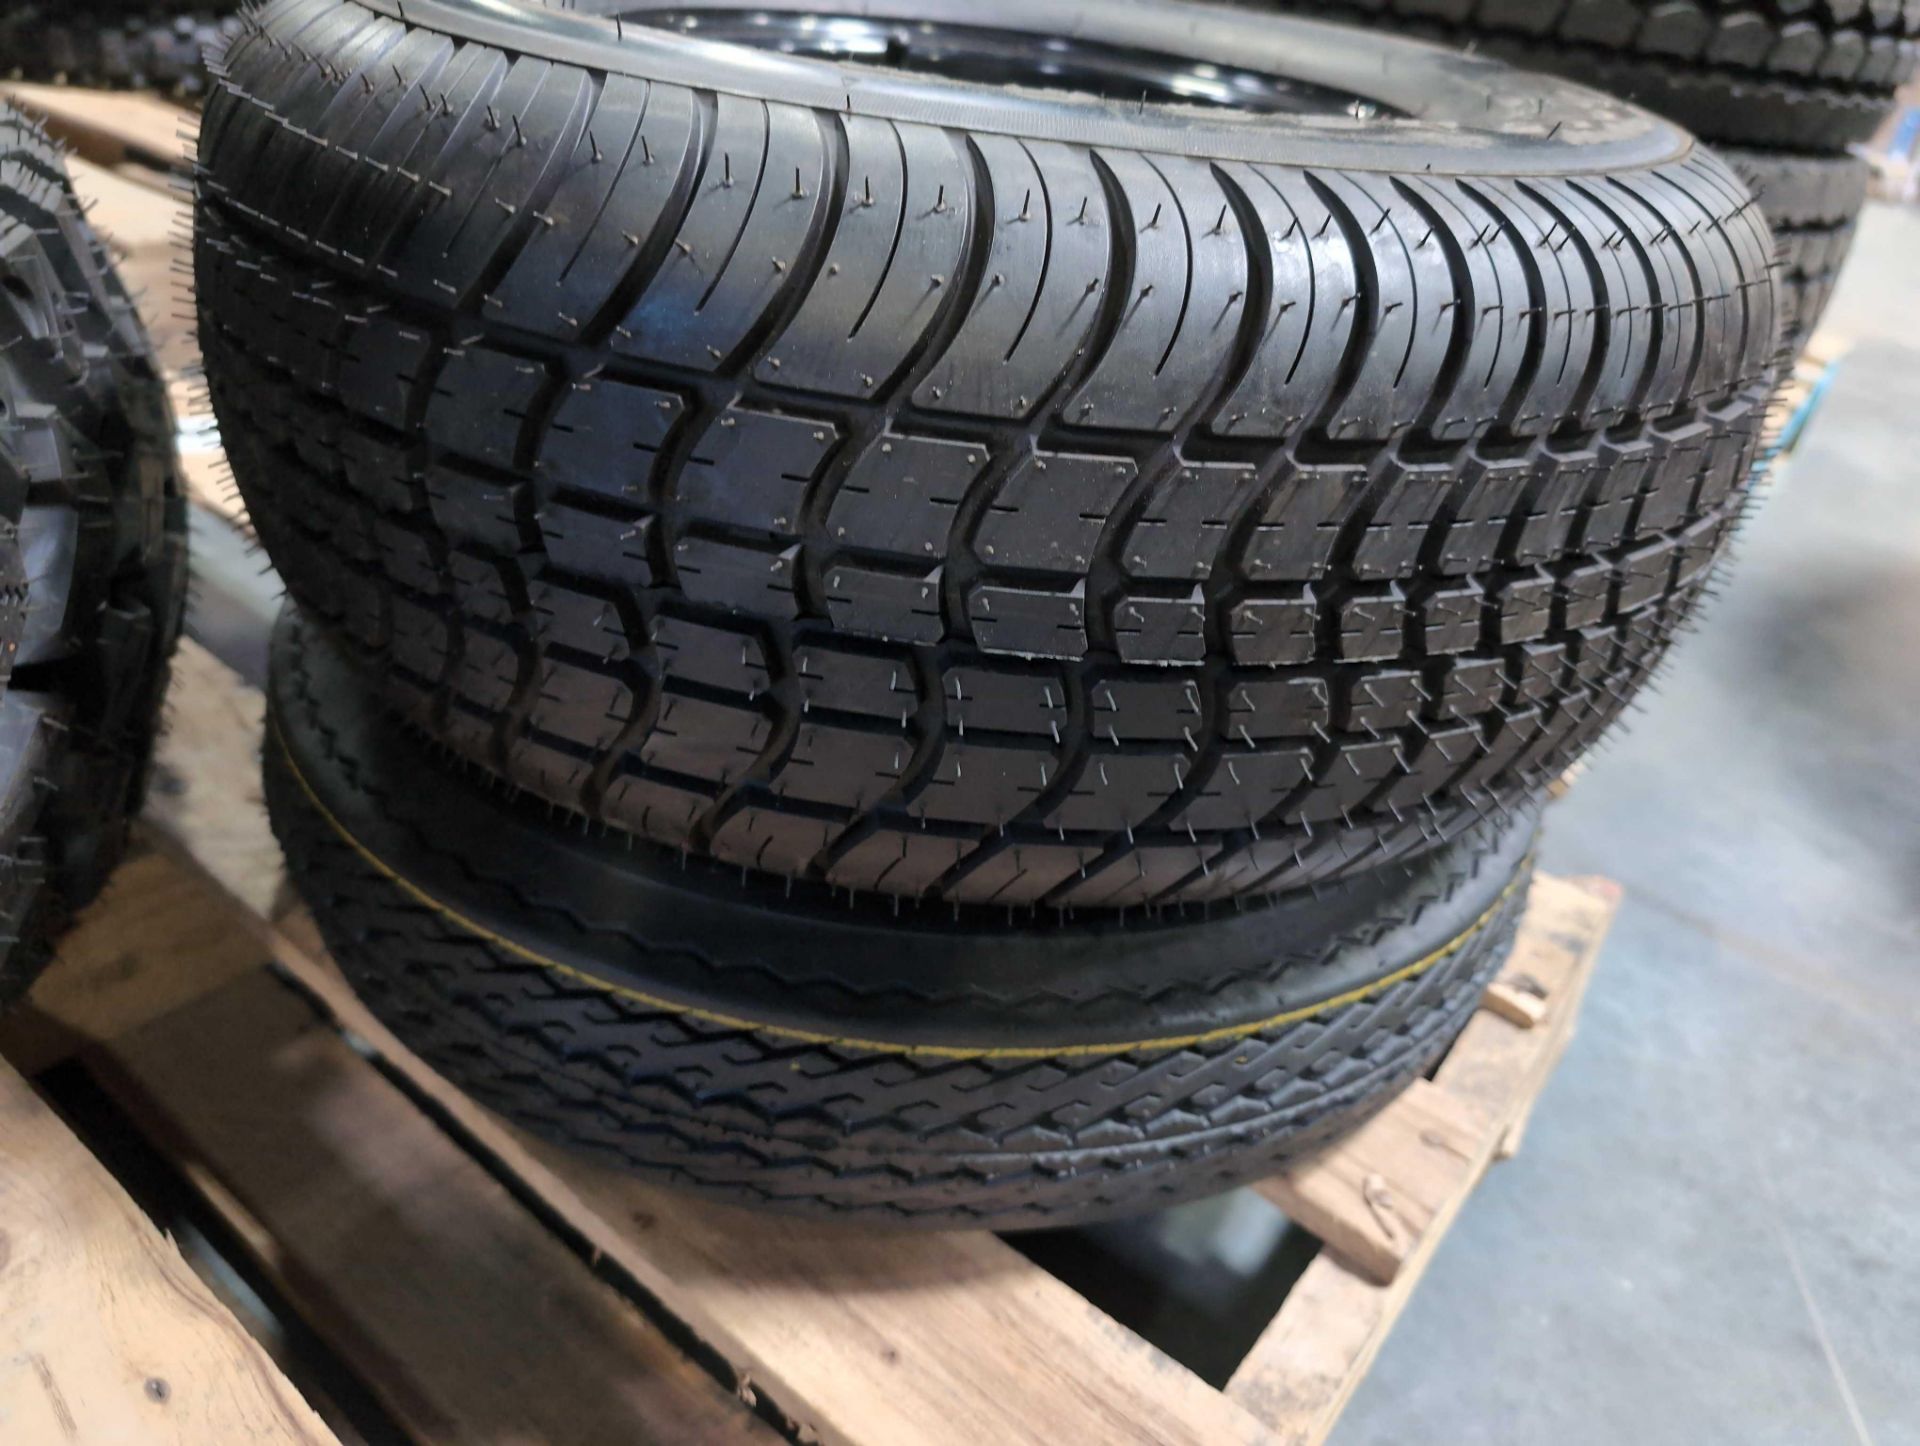 pallet of tires with rims - Image 11 of 11